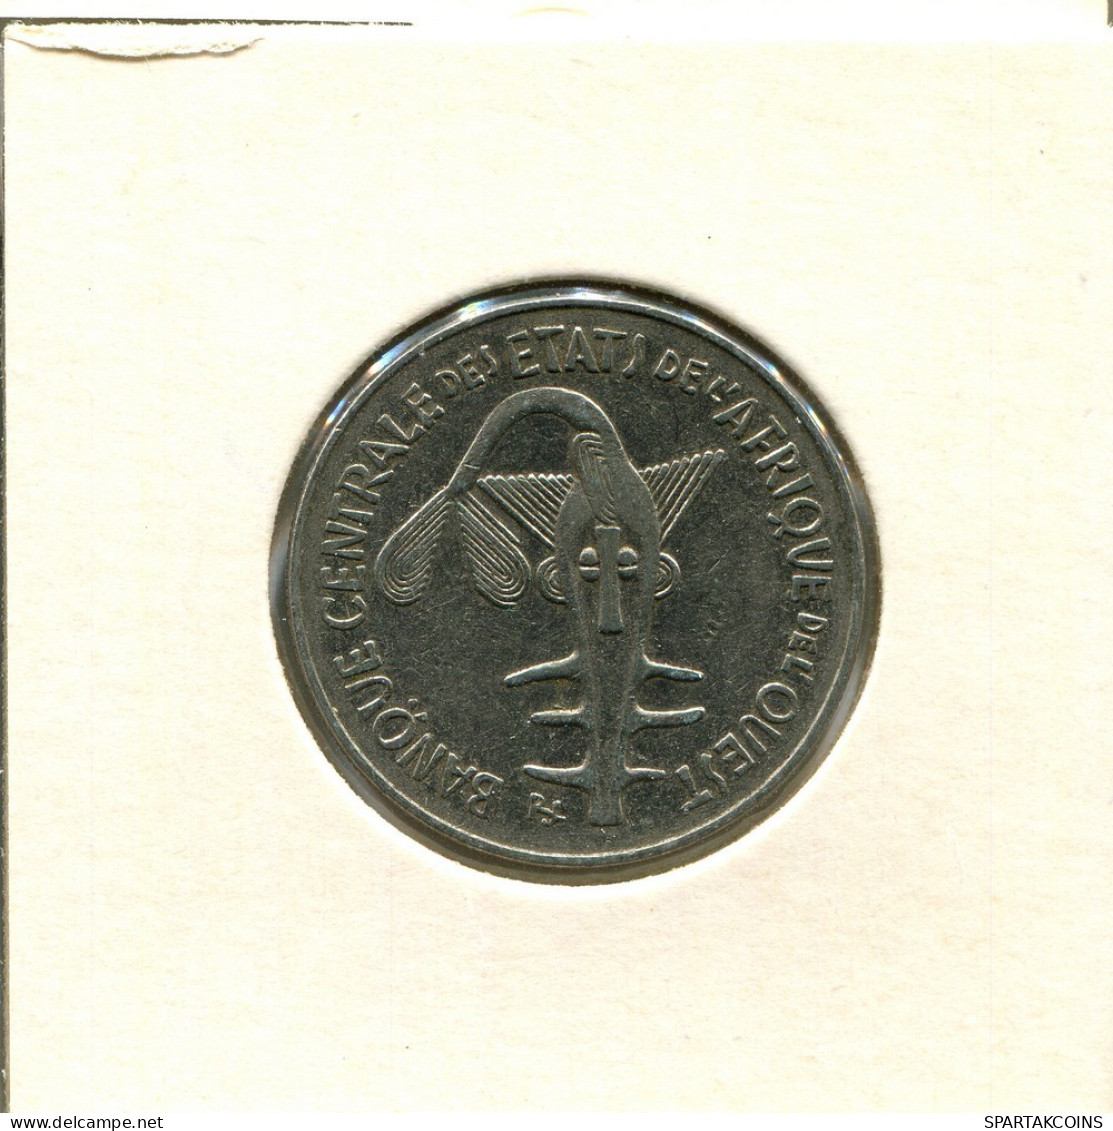 100 FRANCS CFA 1987 Western African States (BCEAO) Coin #AT055.U.A - Otros – Africa